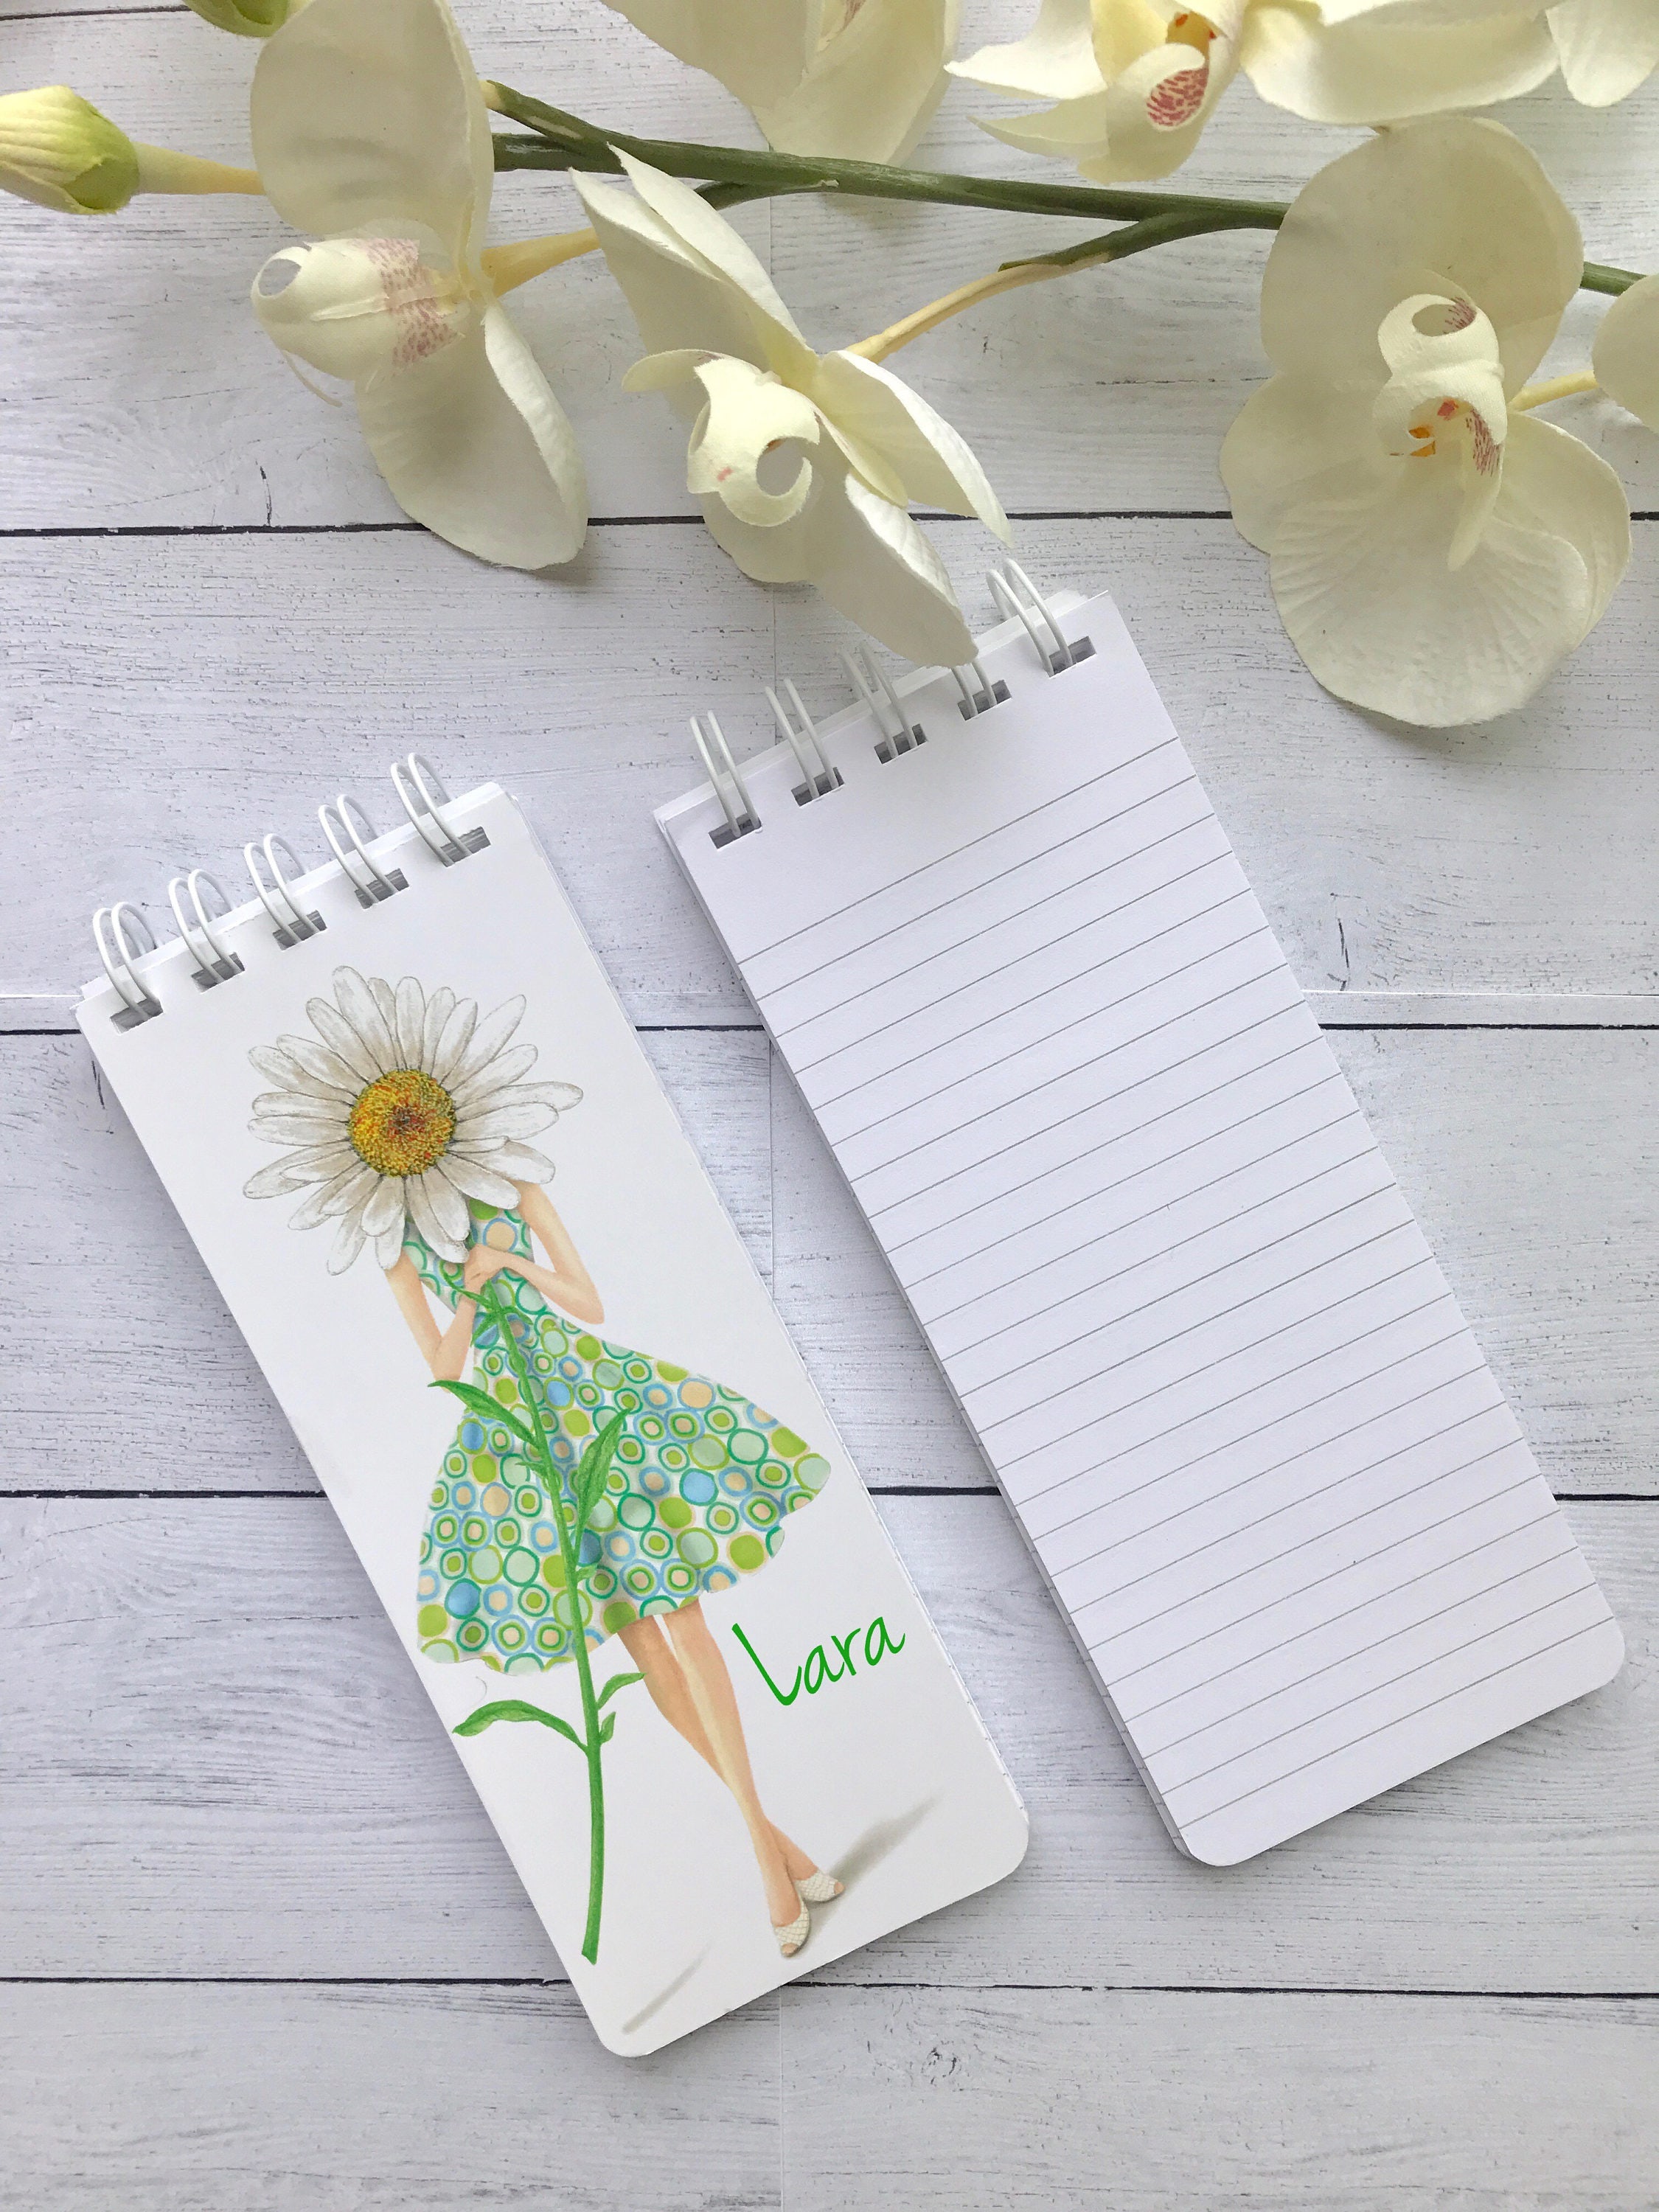 Personalized Notepads, Spiral Bound Pads, To-Do List, Set of 3 Note Pads,  Baby Shower Favors, Grocery List, Custom Note Pads, Baby Socks